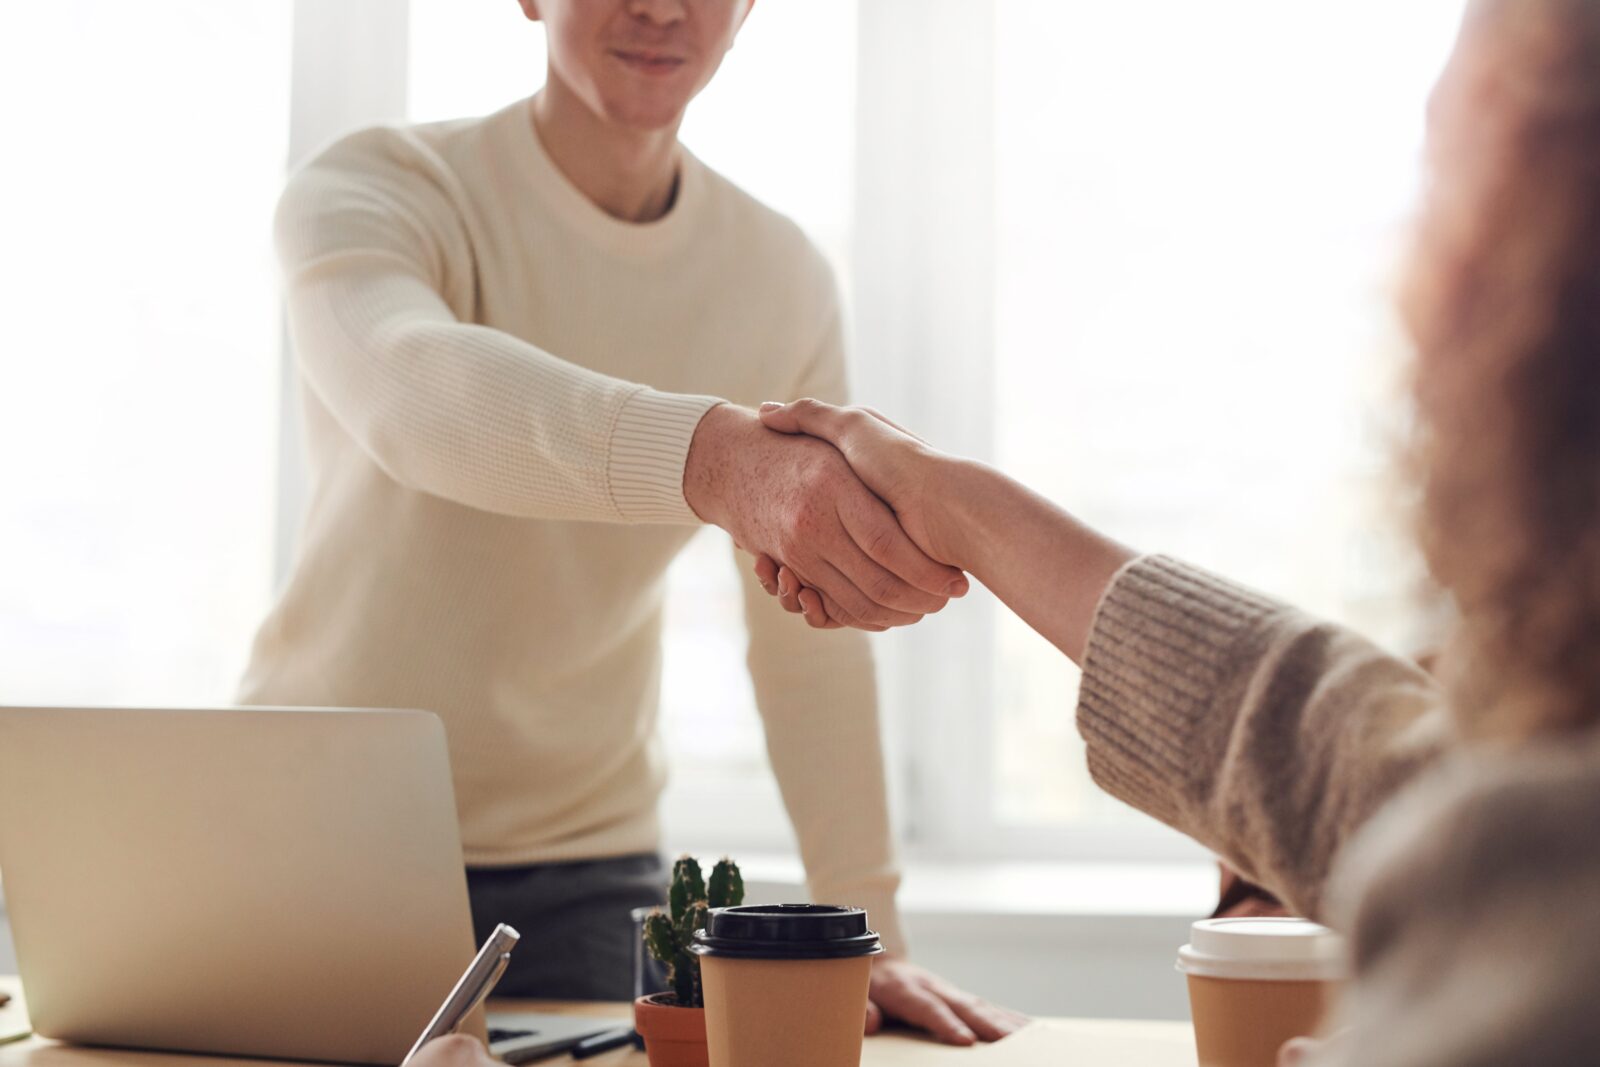 Man and woman demonstrating partnership by shaking hands across office desk